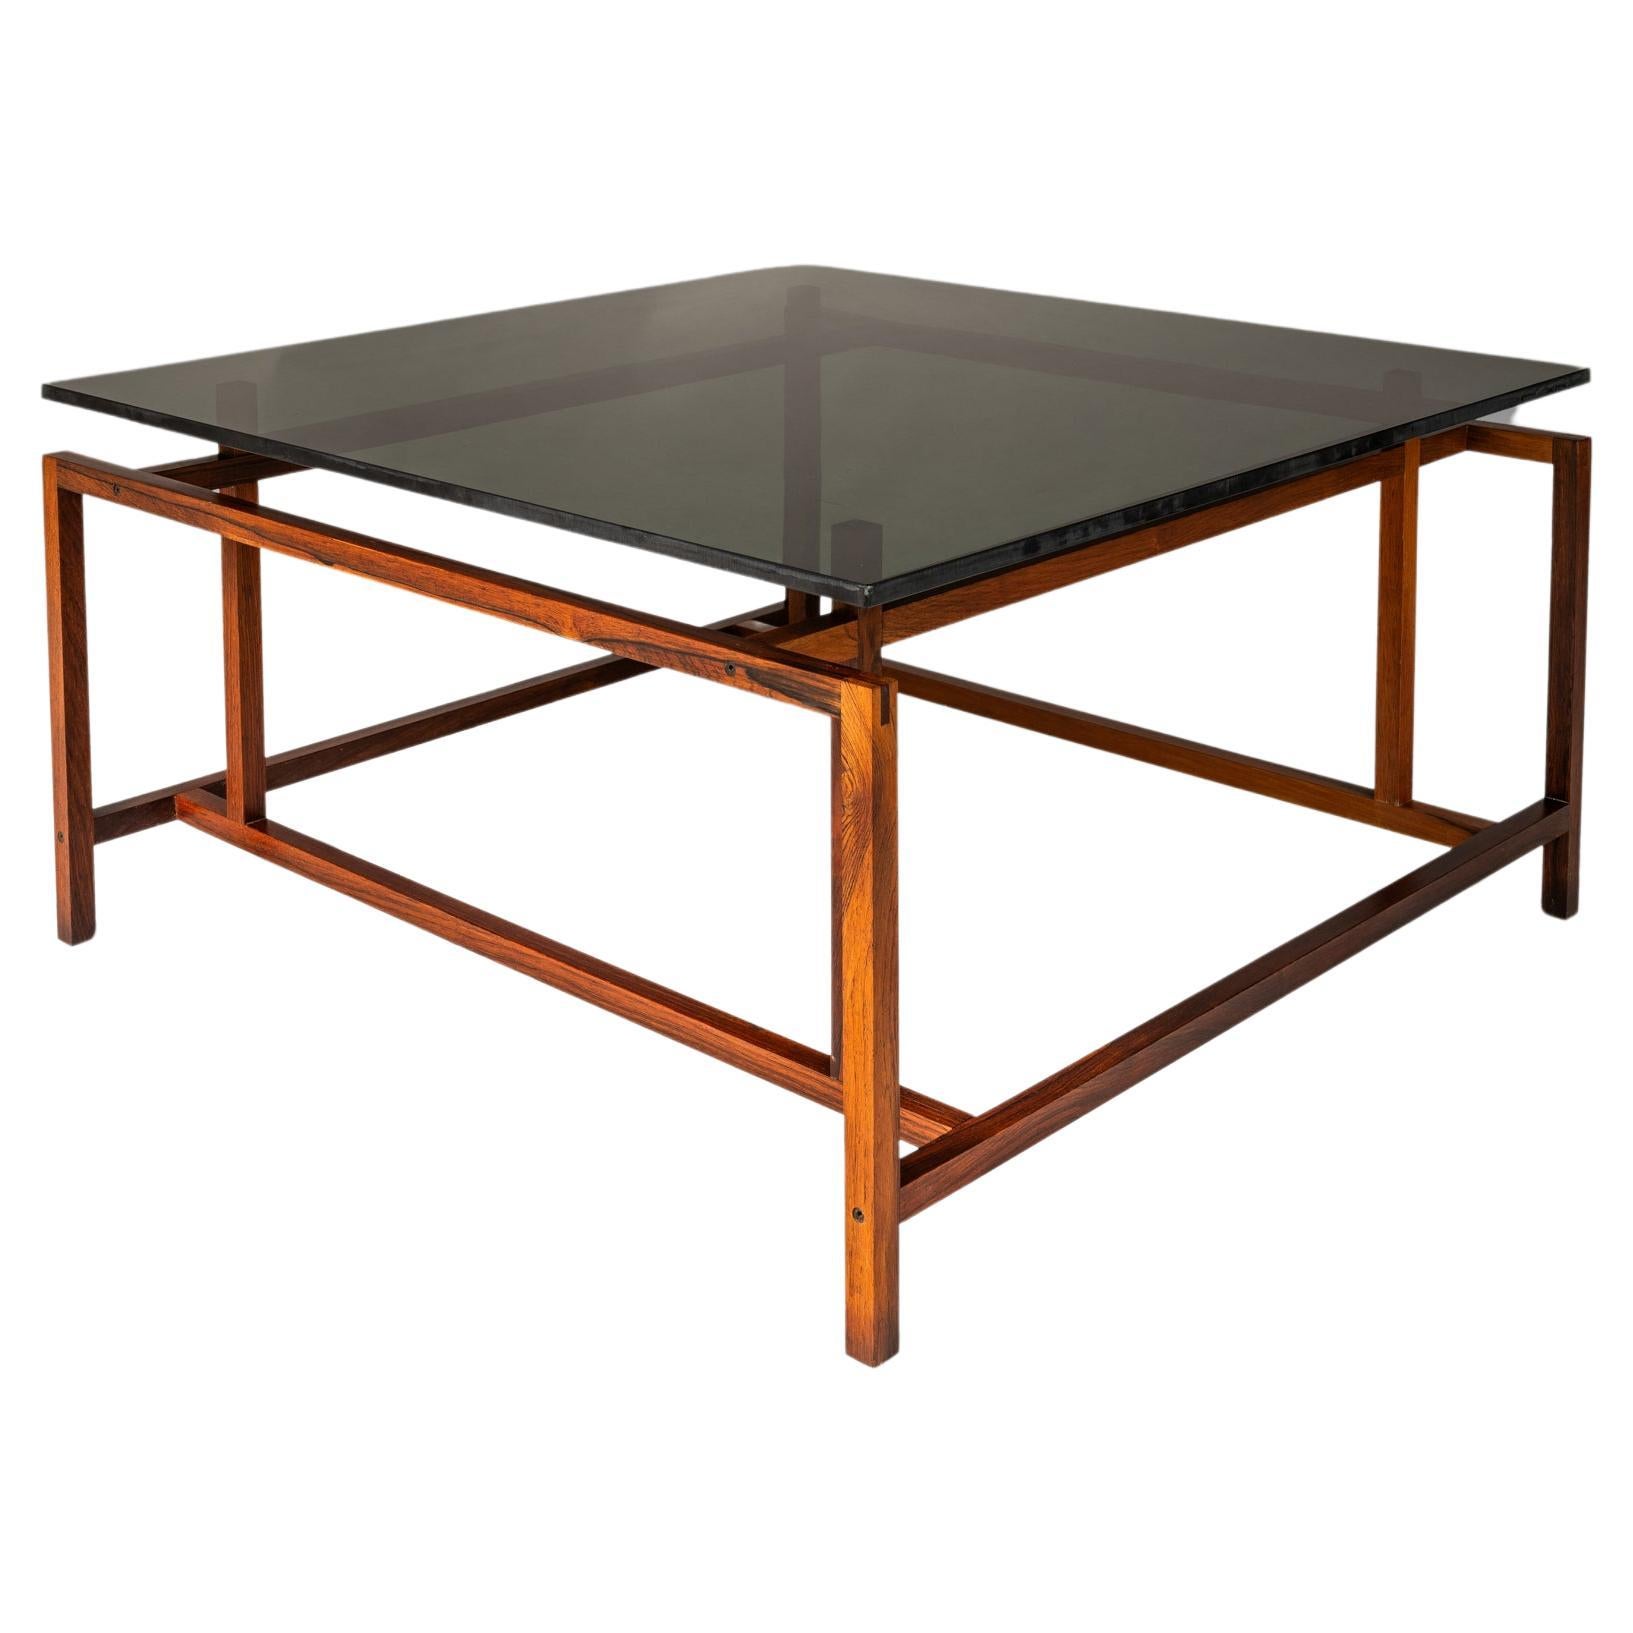 Rosewood & Smoked Glass Coffee Table by Henning Nørgaard, Denmark, c. 1960's For Sale